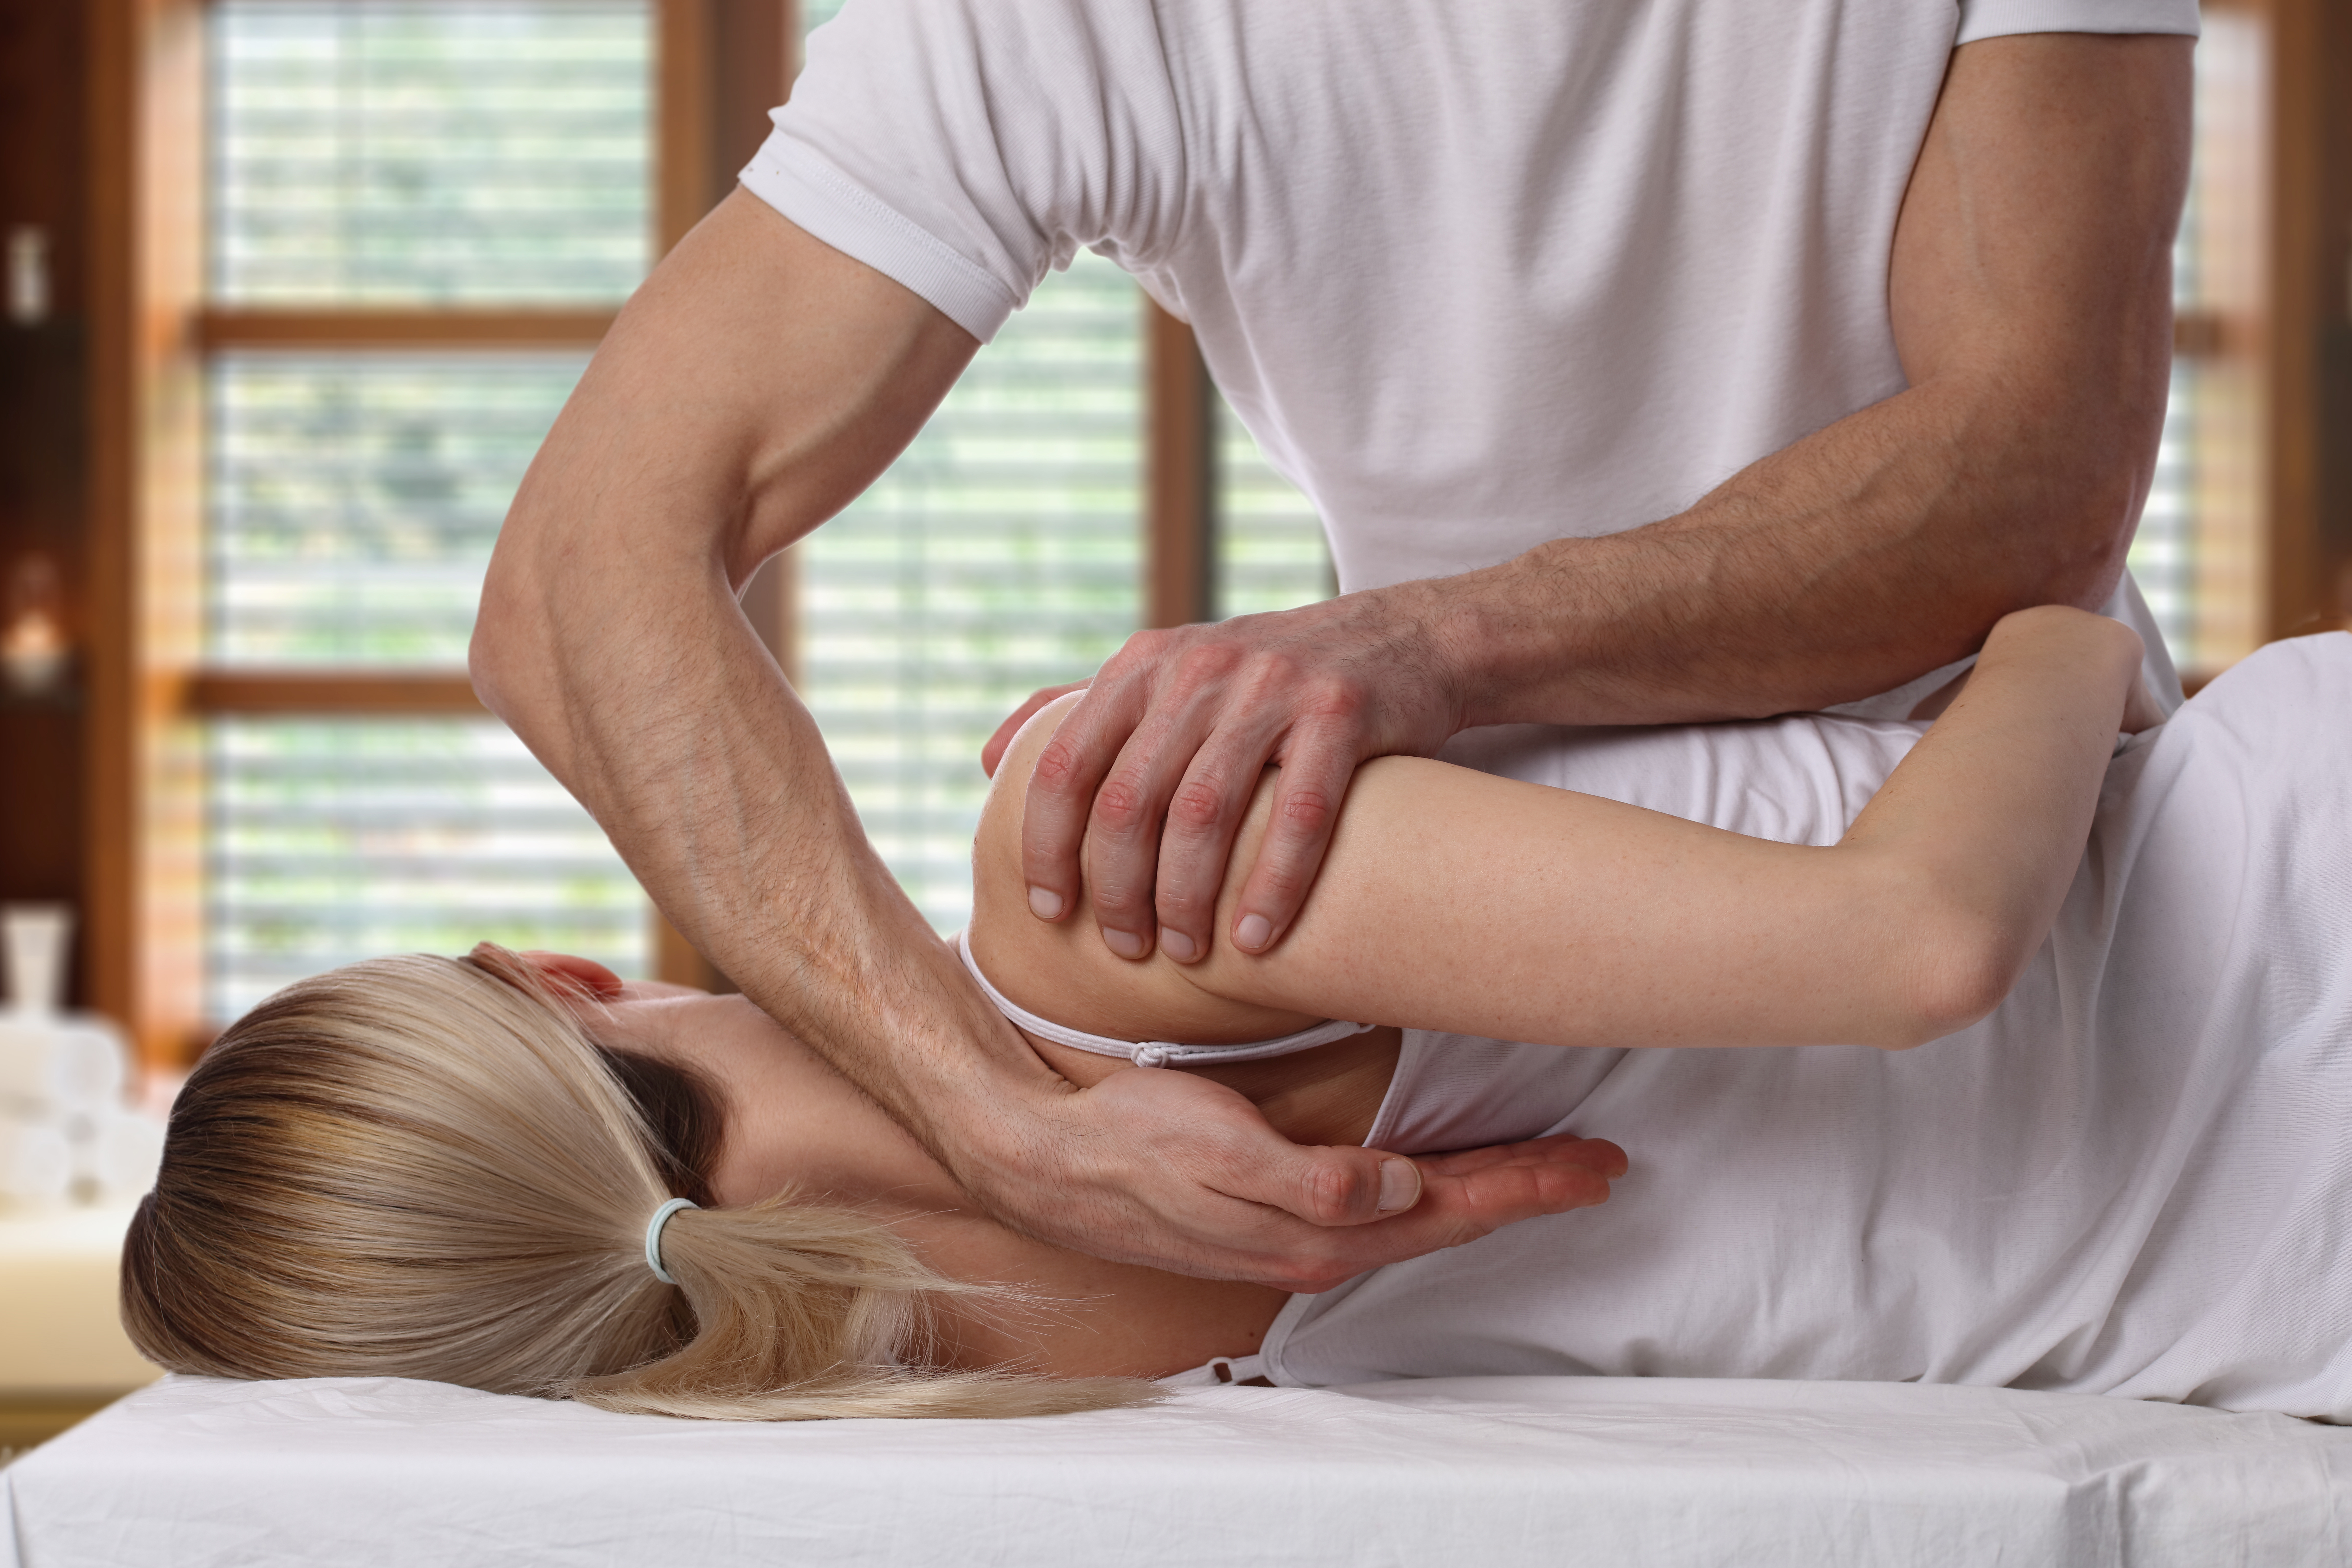 A woman lying on an adjustment table and receiving chiropractic care for back pain from a male chiropractor.